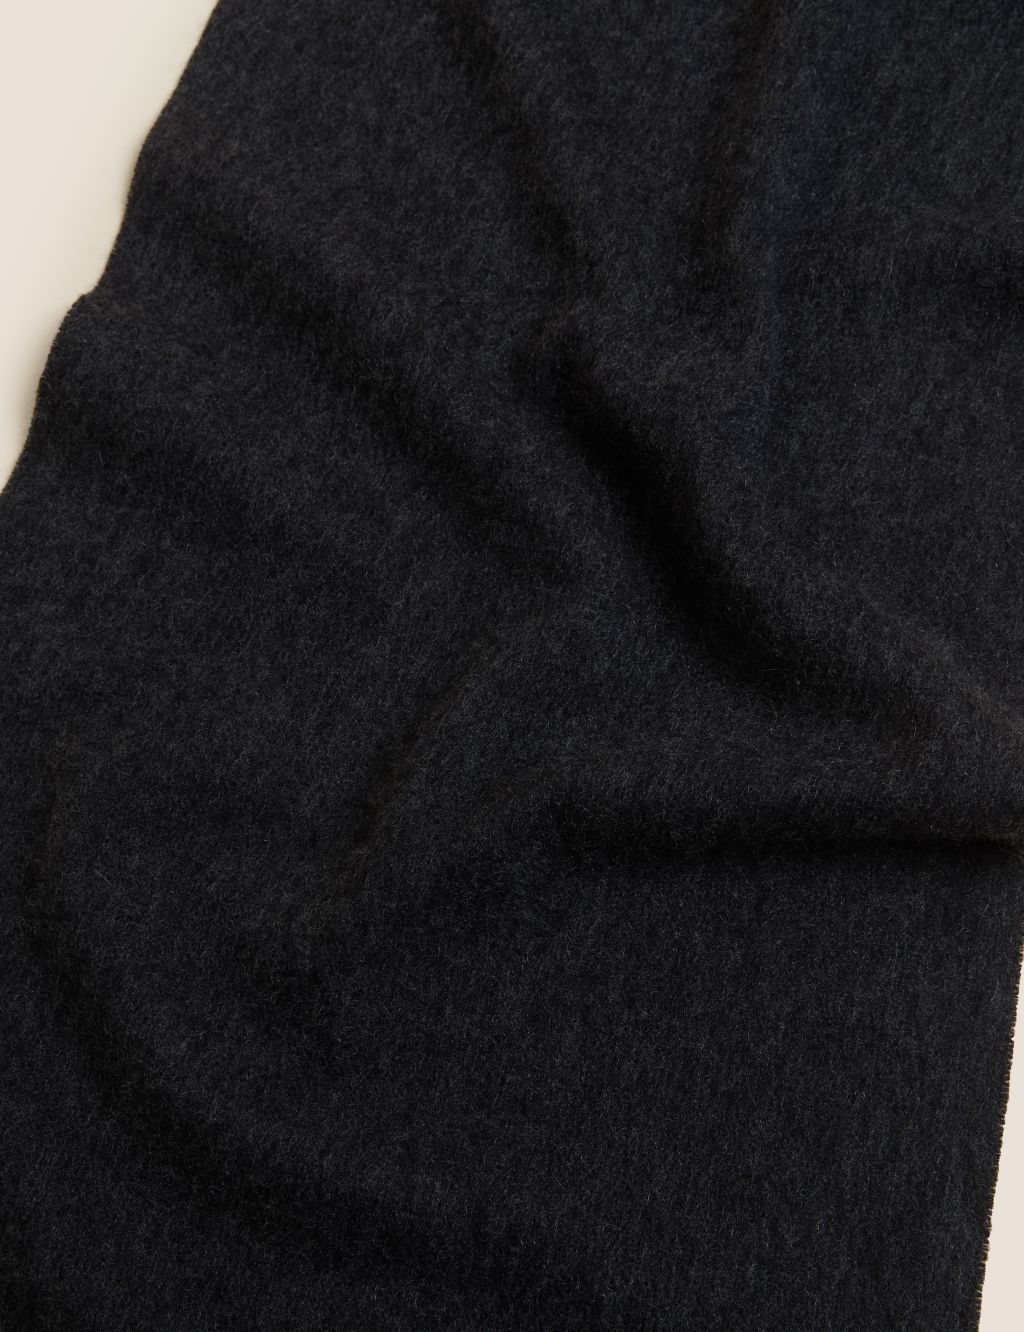 Personalised Men's Pure Cashmere Scarf image 2